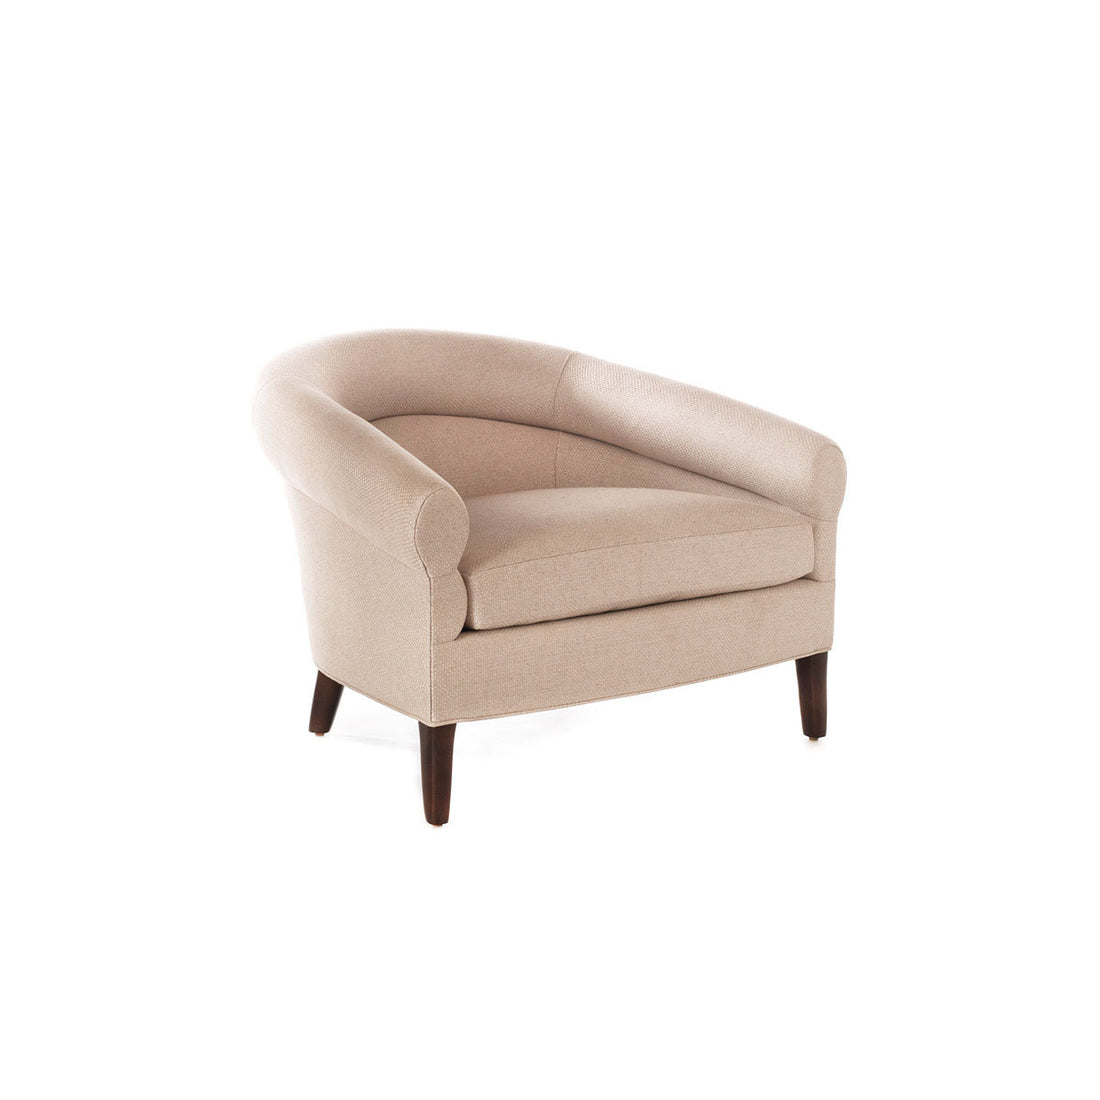 Clare Lounge Chair